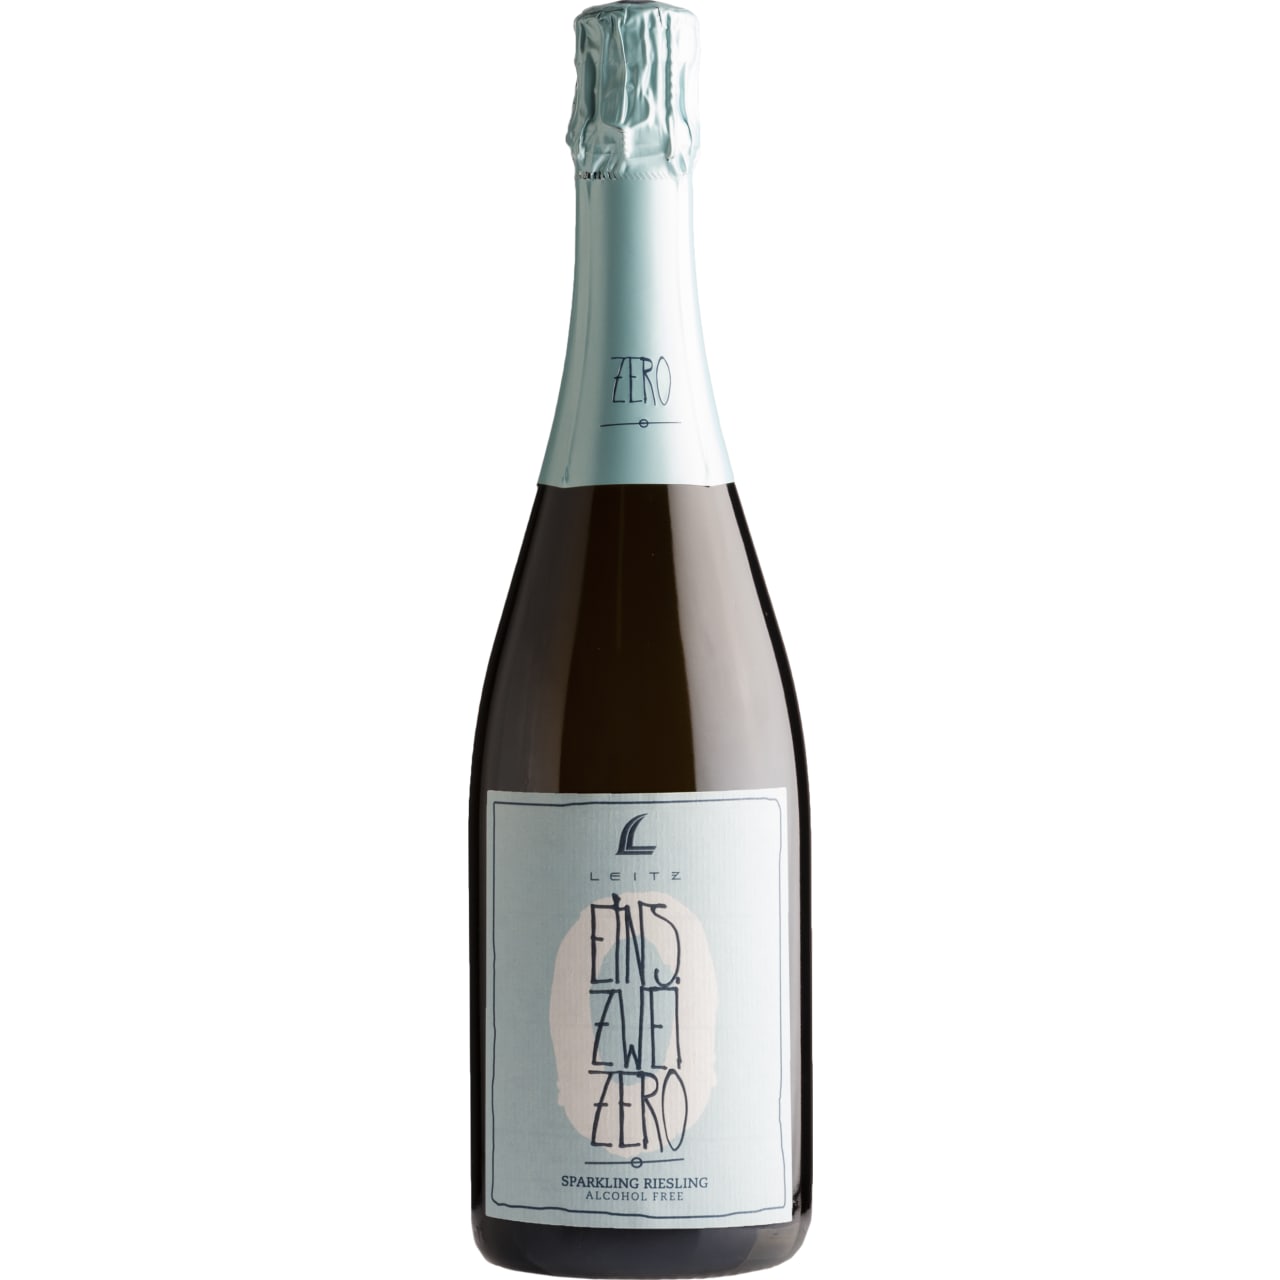 The Leitz EINS-ZWEI-ZERO Sparkling offers an original character that is clean and fresh with notes of lime and citrus.